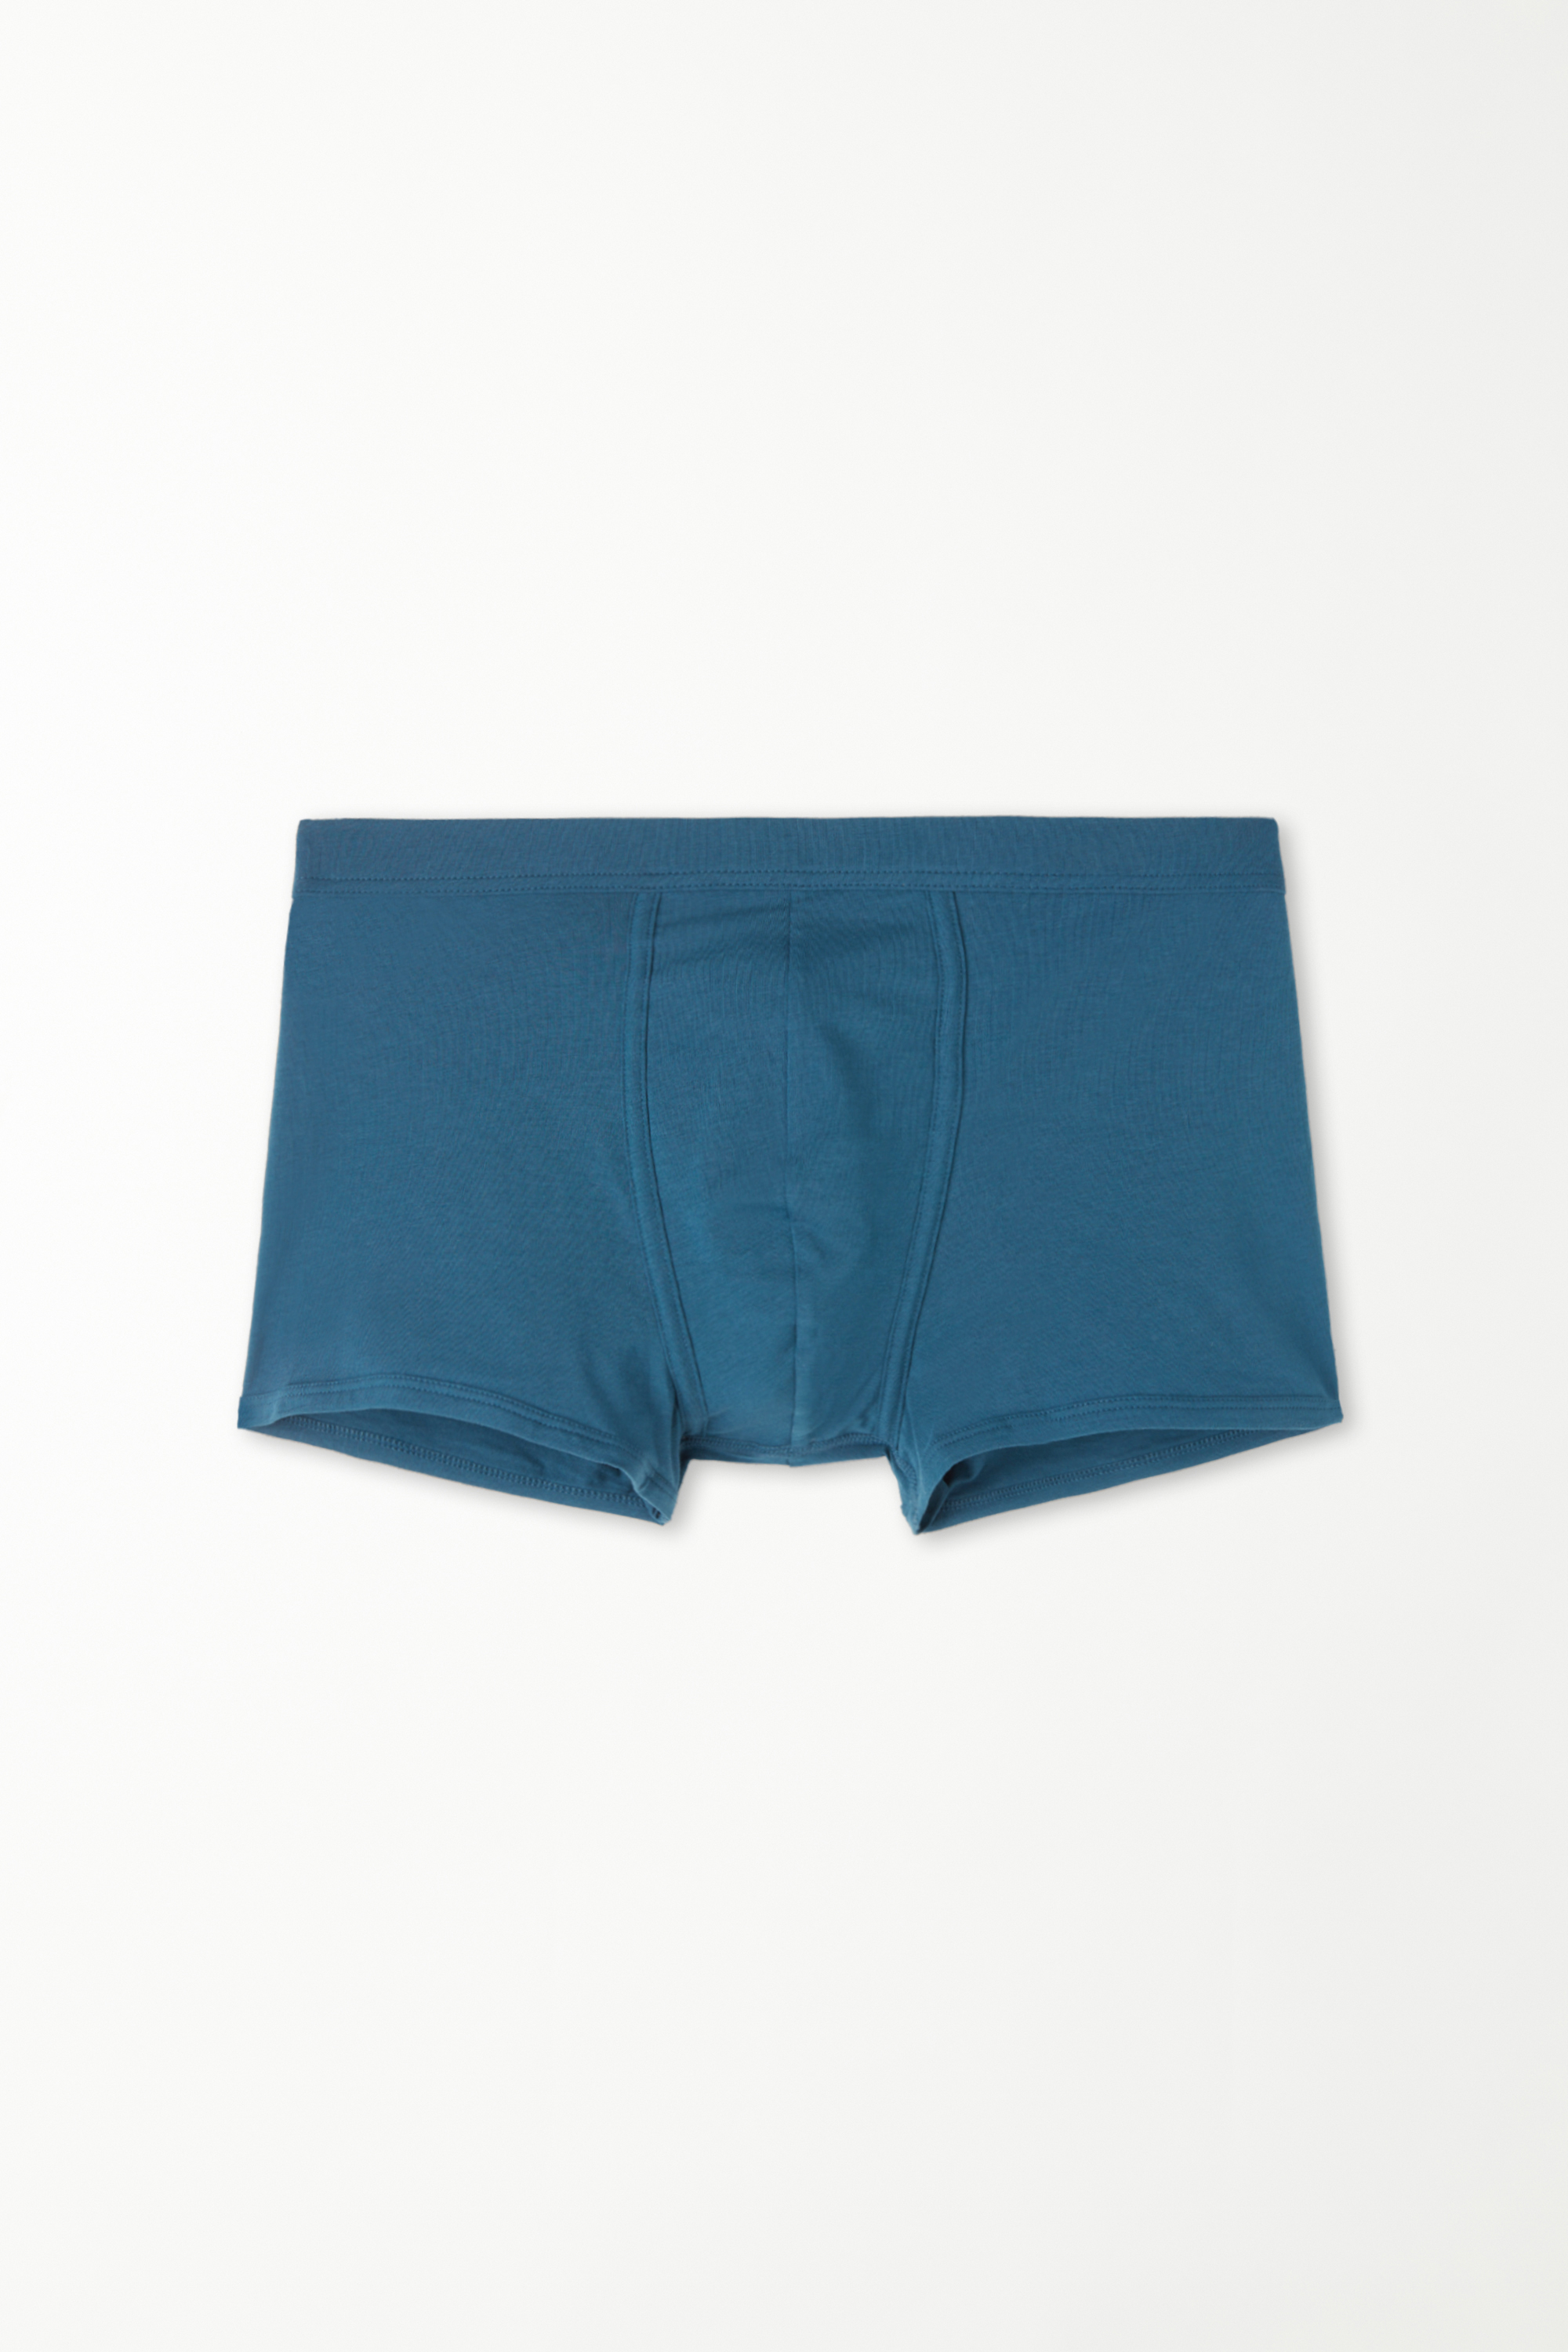 Boxers in the Lightest Extrafine Cotton